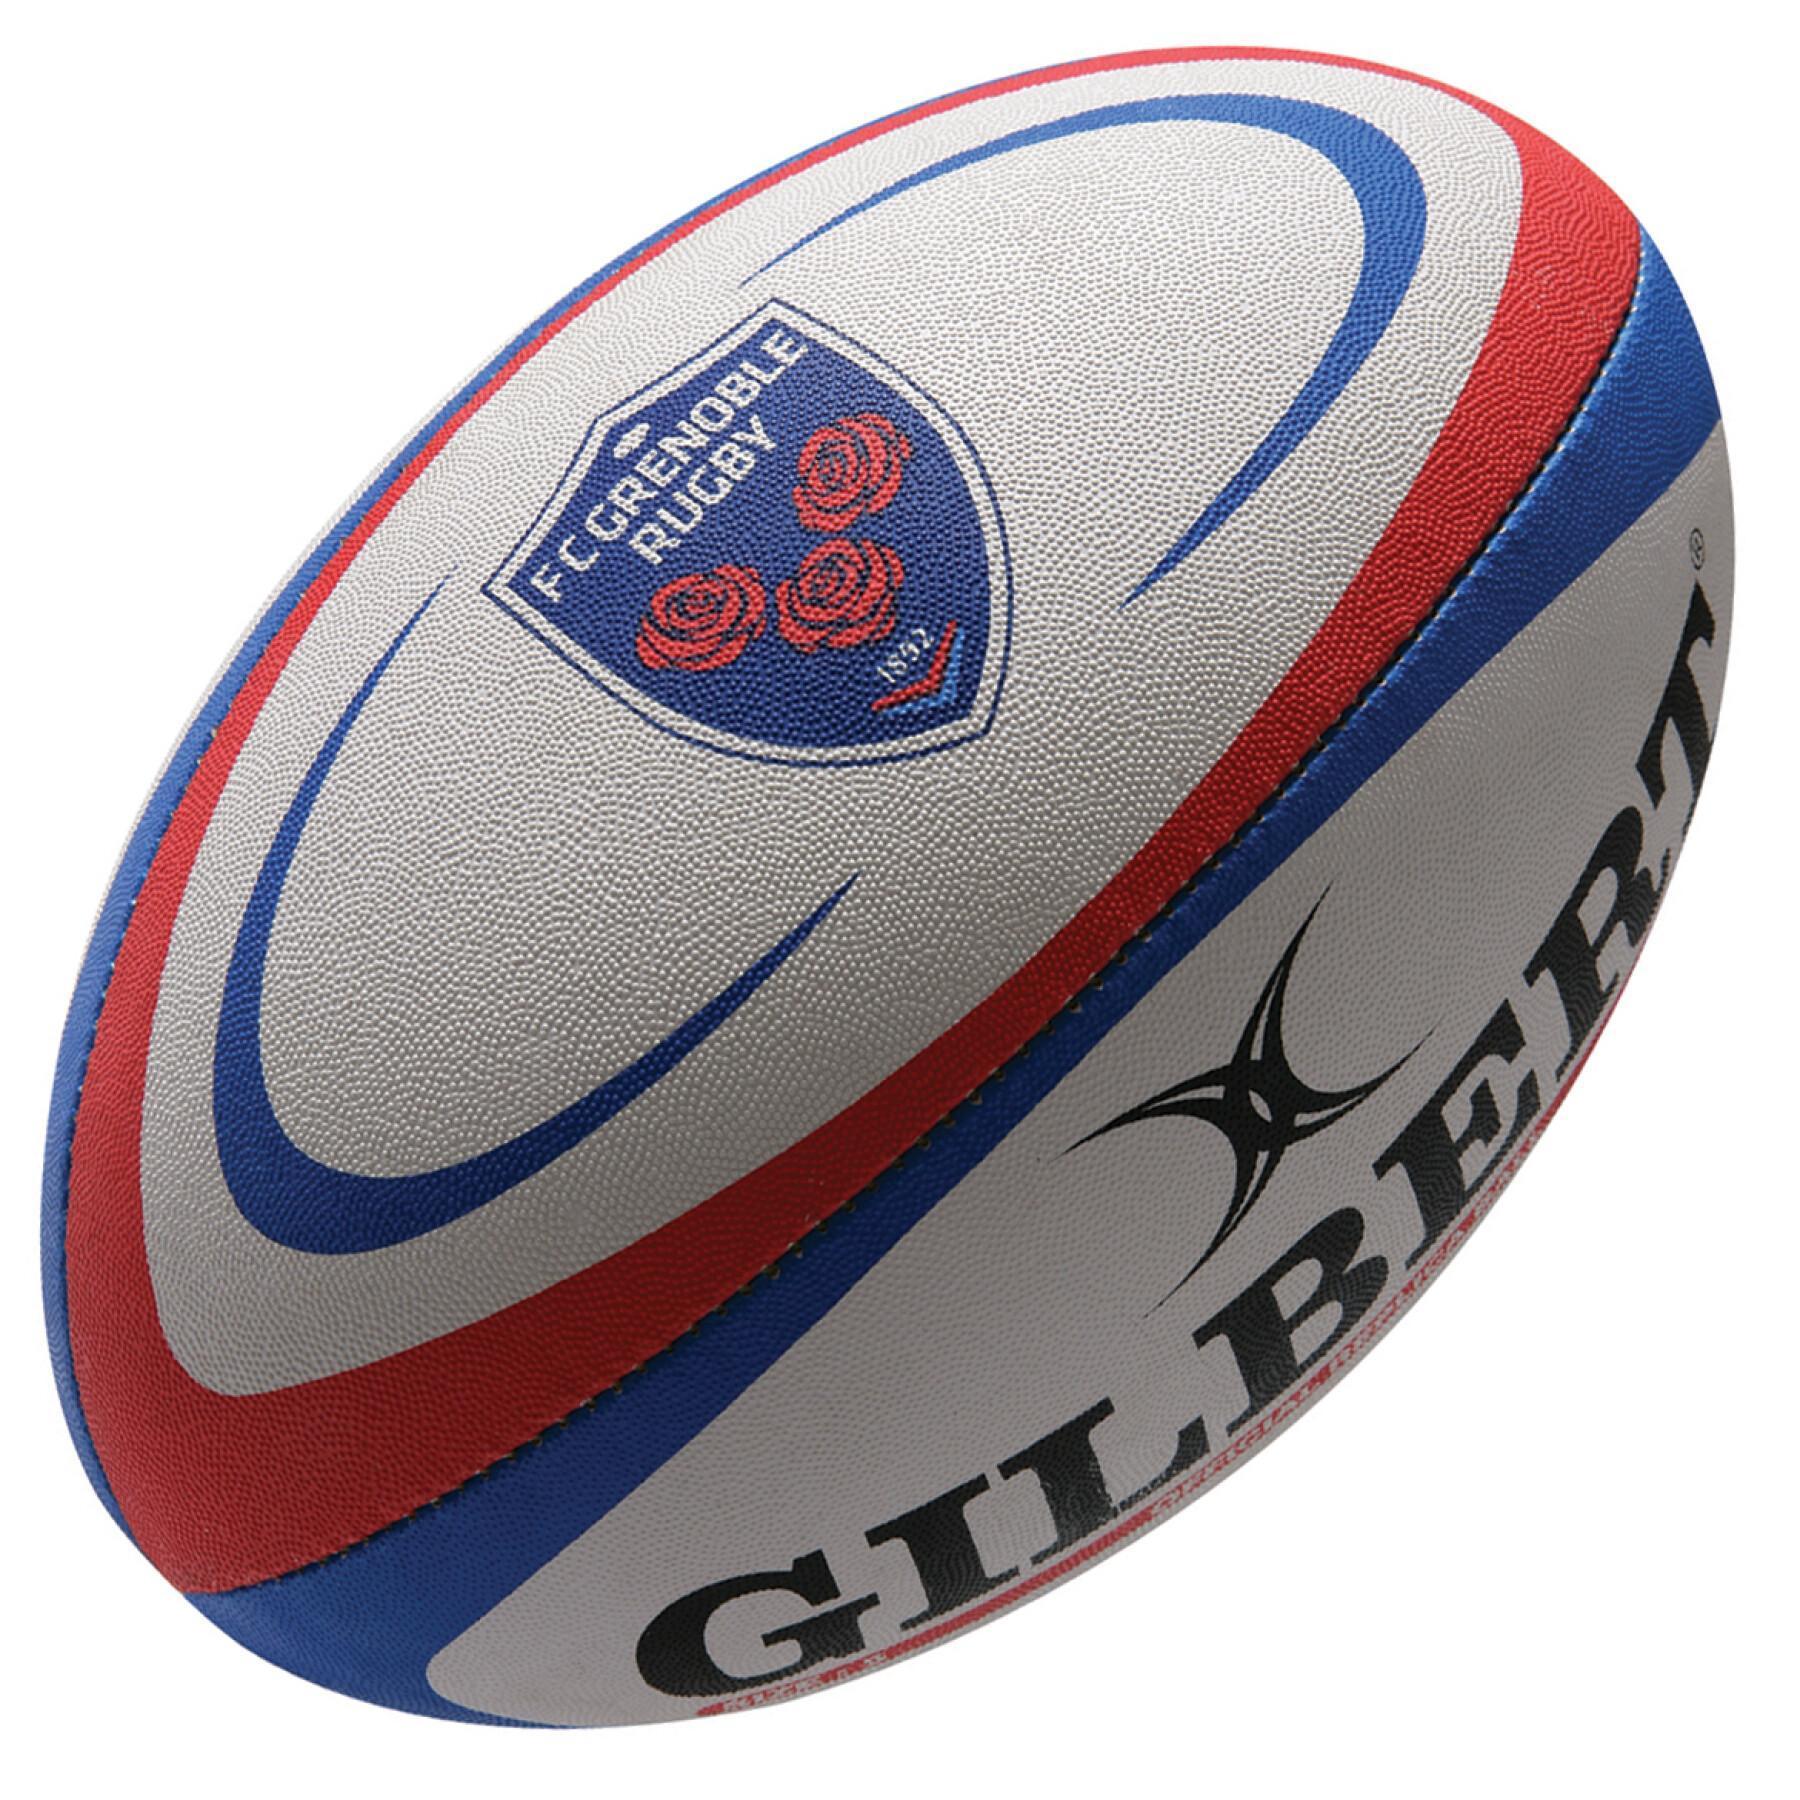 Rugby bal Grenoble